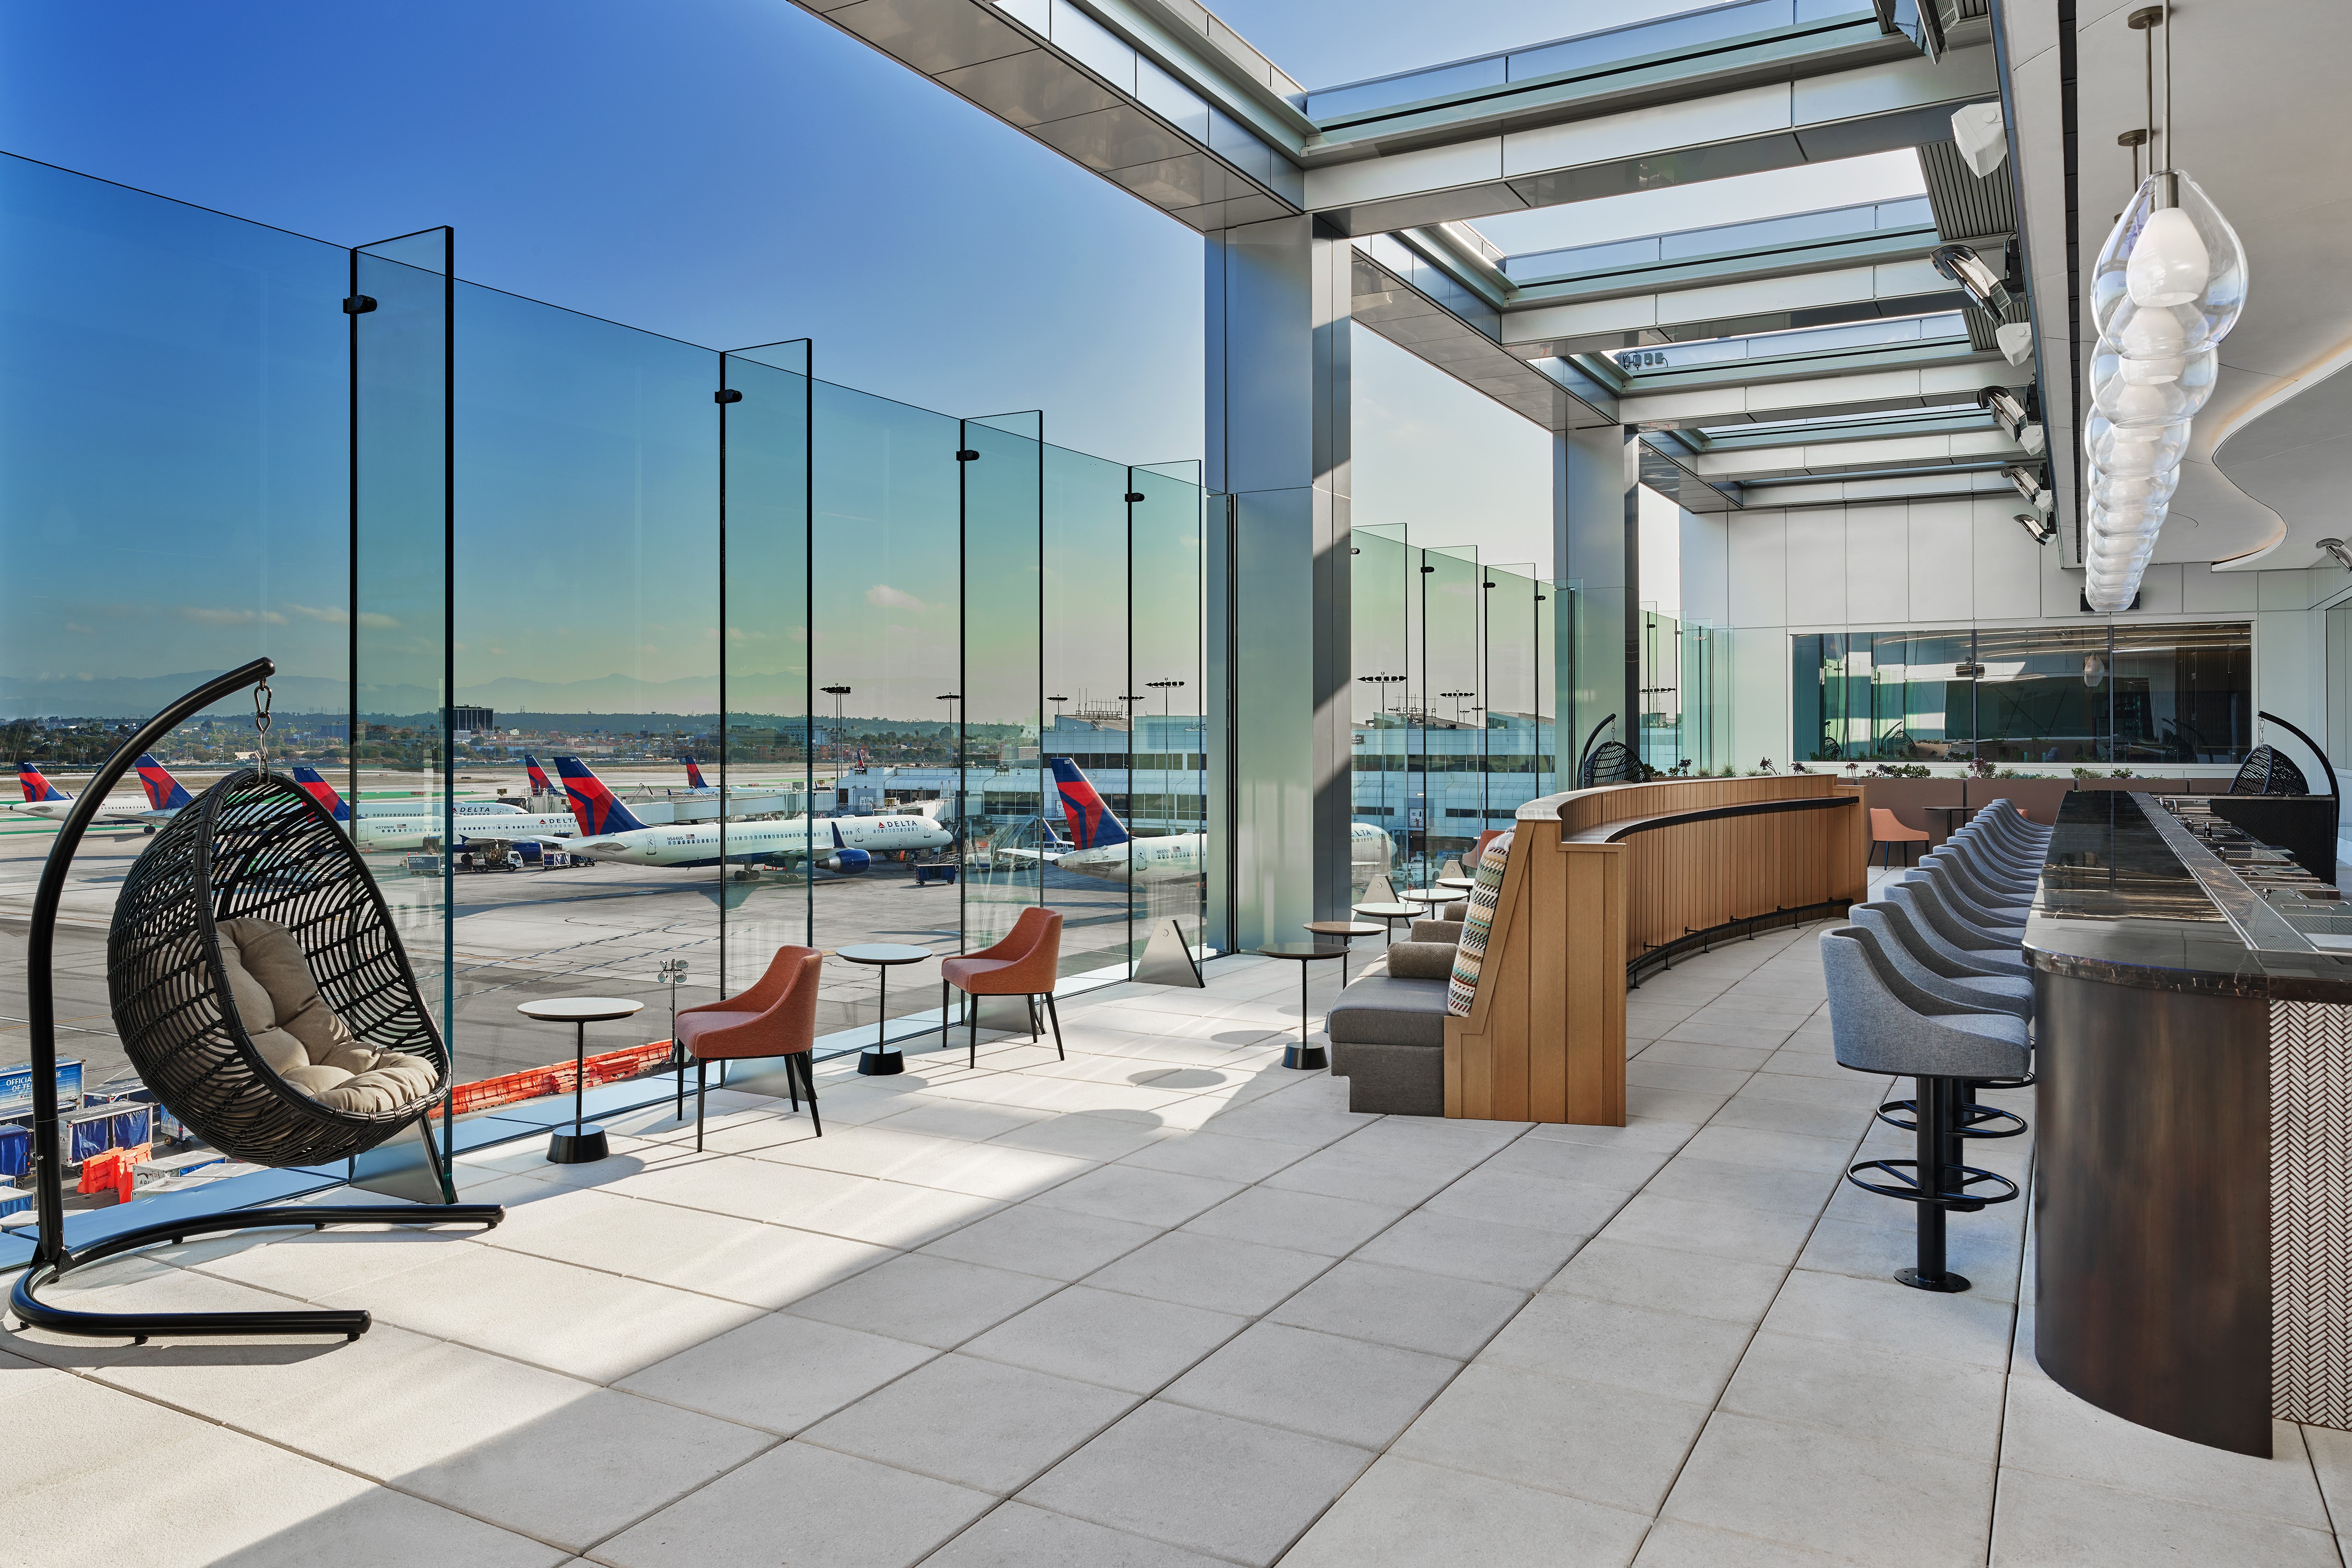 The jewel in the Club's crown is the Sky Deck, a year-round, all-weather terrace where guests can enjoy drinks from the premium bar and panoramic views of downtown Los Angeles and the Los Angeles Hills. Hollywood.